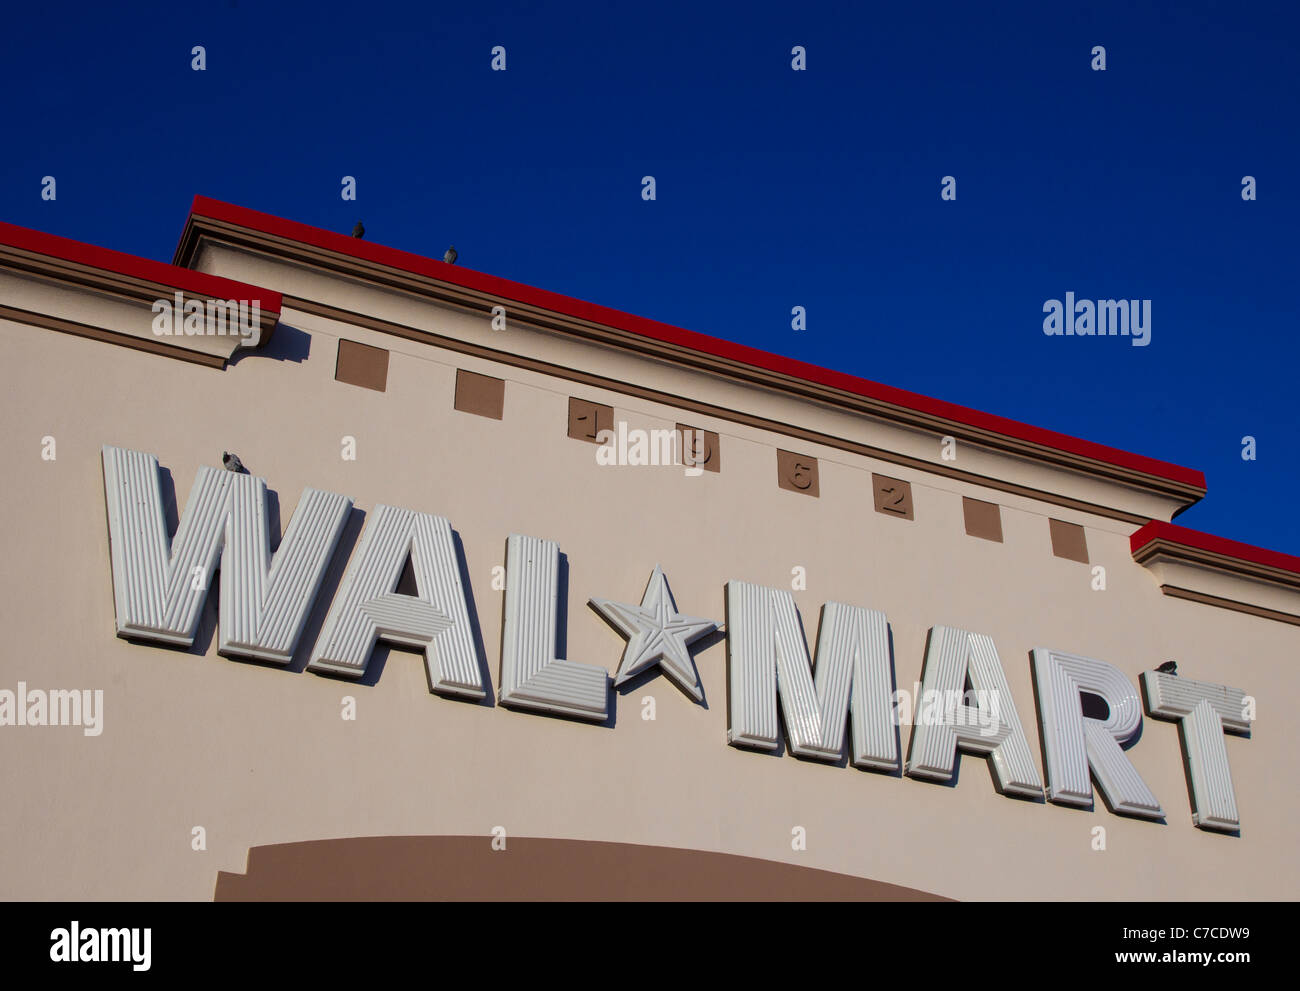 Sign and logo at a Wal Mart chain store Stock Photo